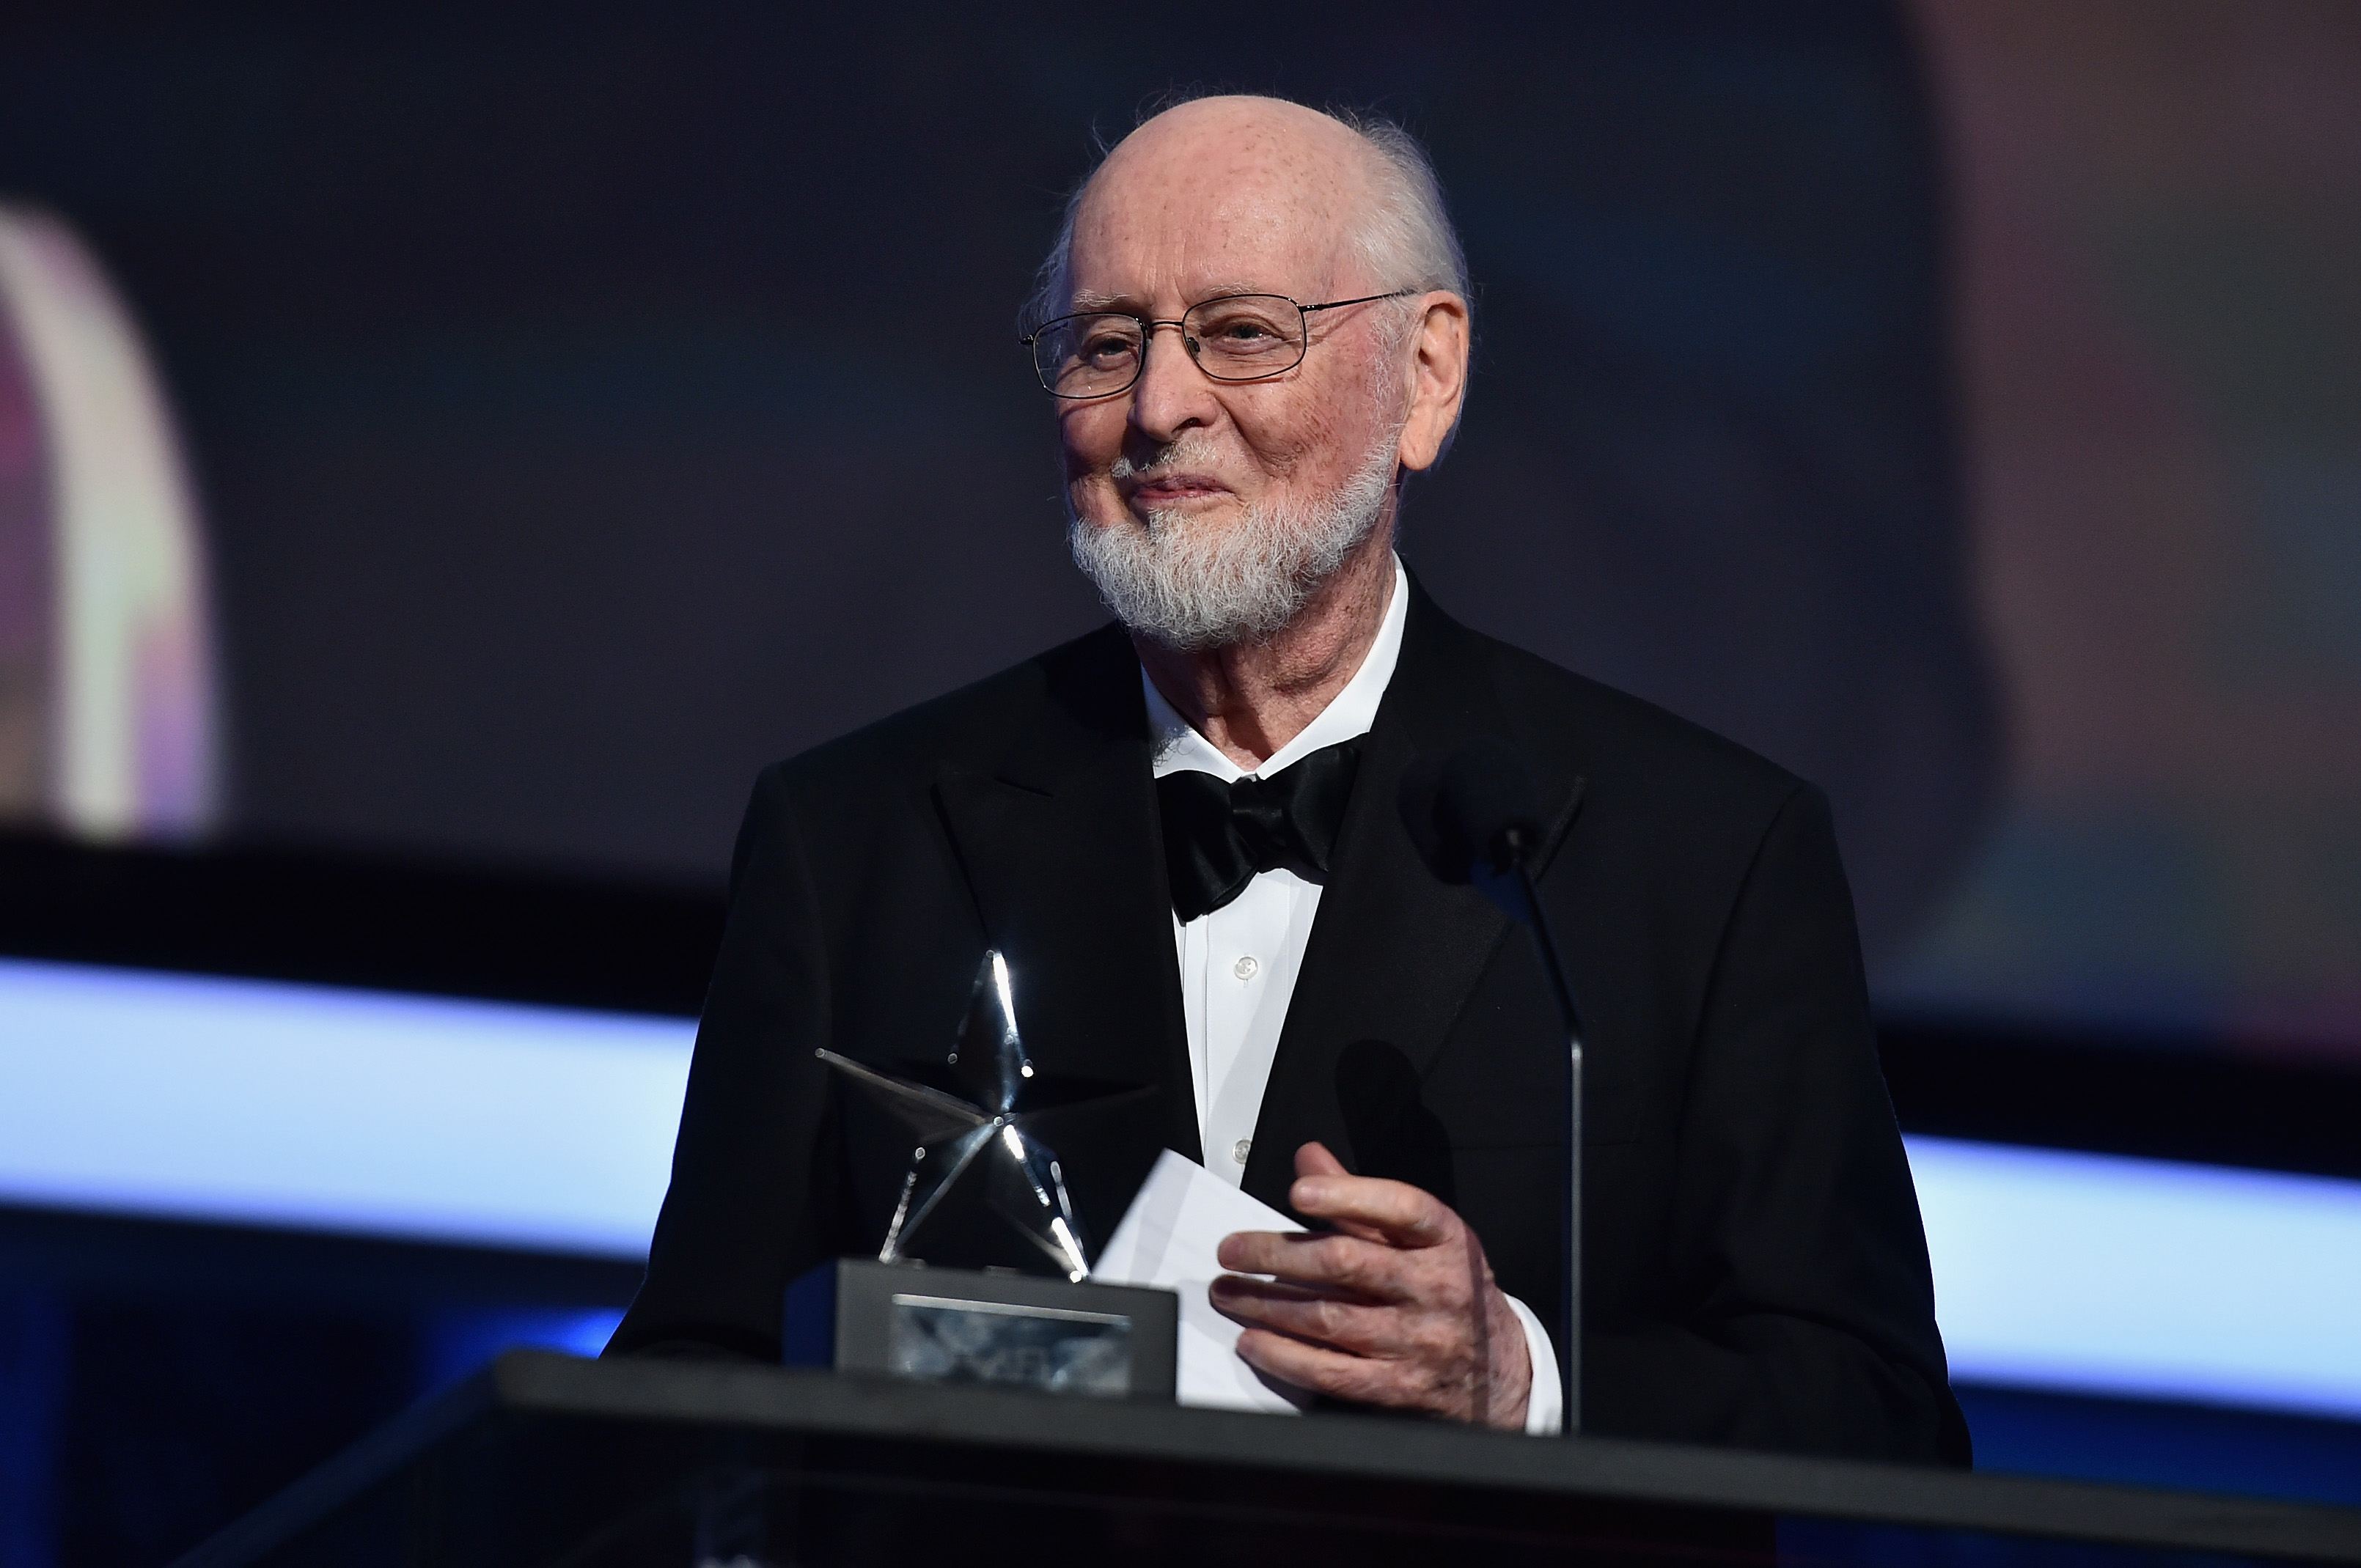 Honoree John Williams accepts the Life Achievement Award onstage during American Film Institute's 44th Life Achievement Award Gala Tribute show on June 9, 2016 in Hollywood, California. (Alberto E. Rodriguez—Getty Images for Turner)